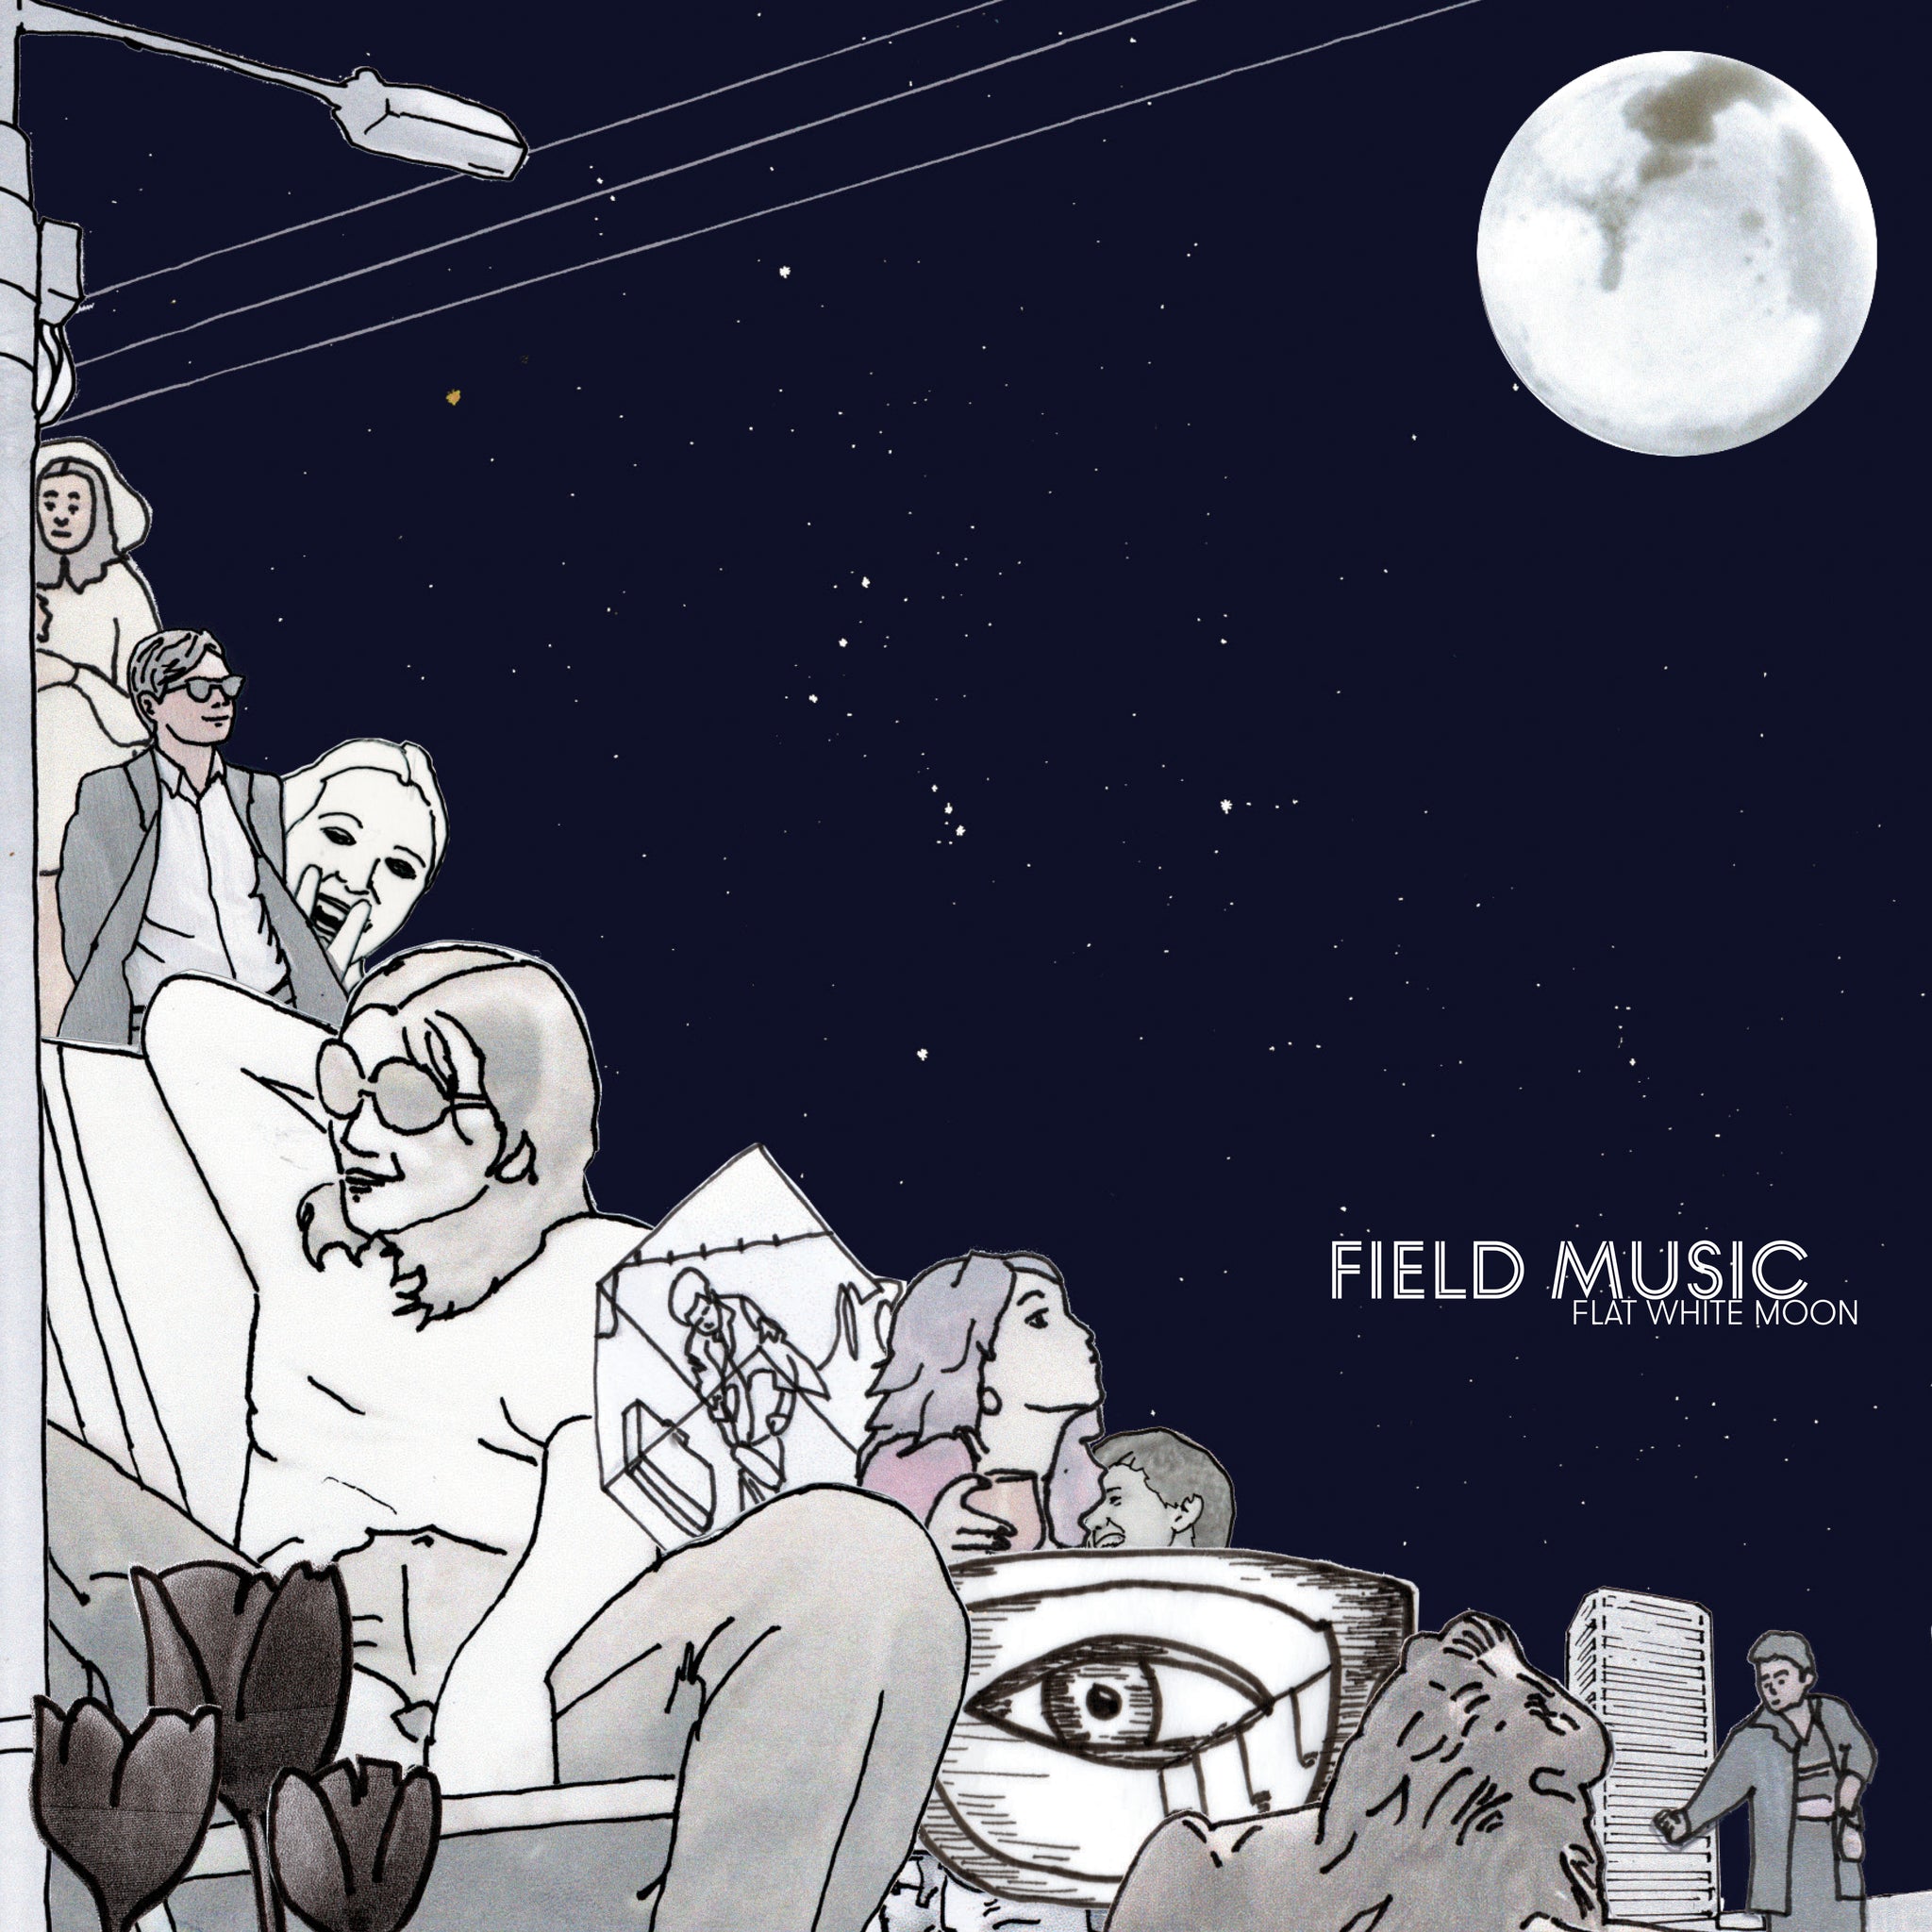 Field Music - Flat White Moon (Limited Edition Transparent Vinyl)